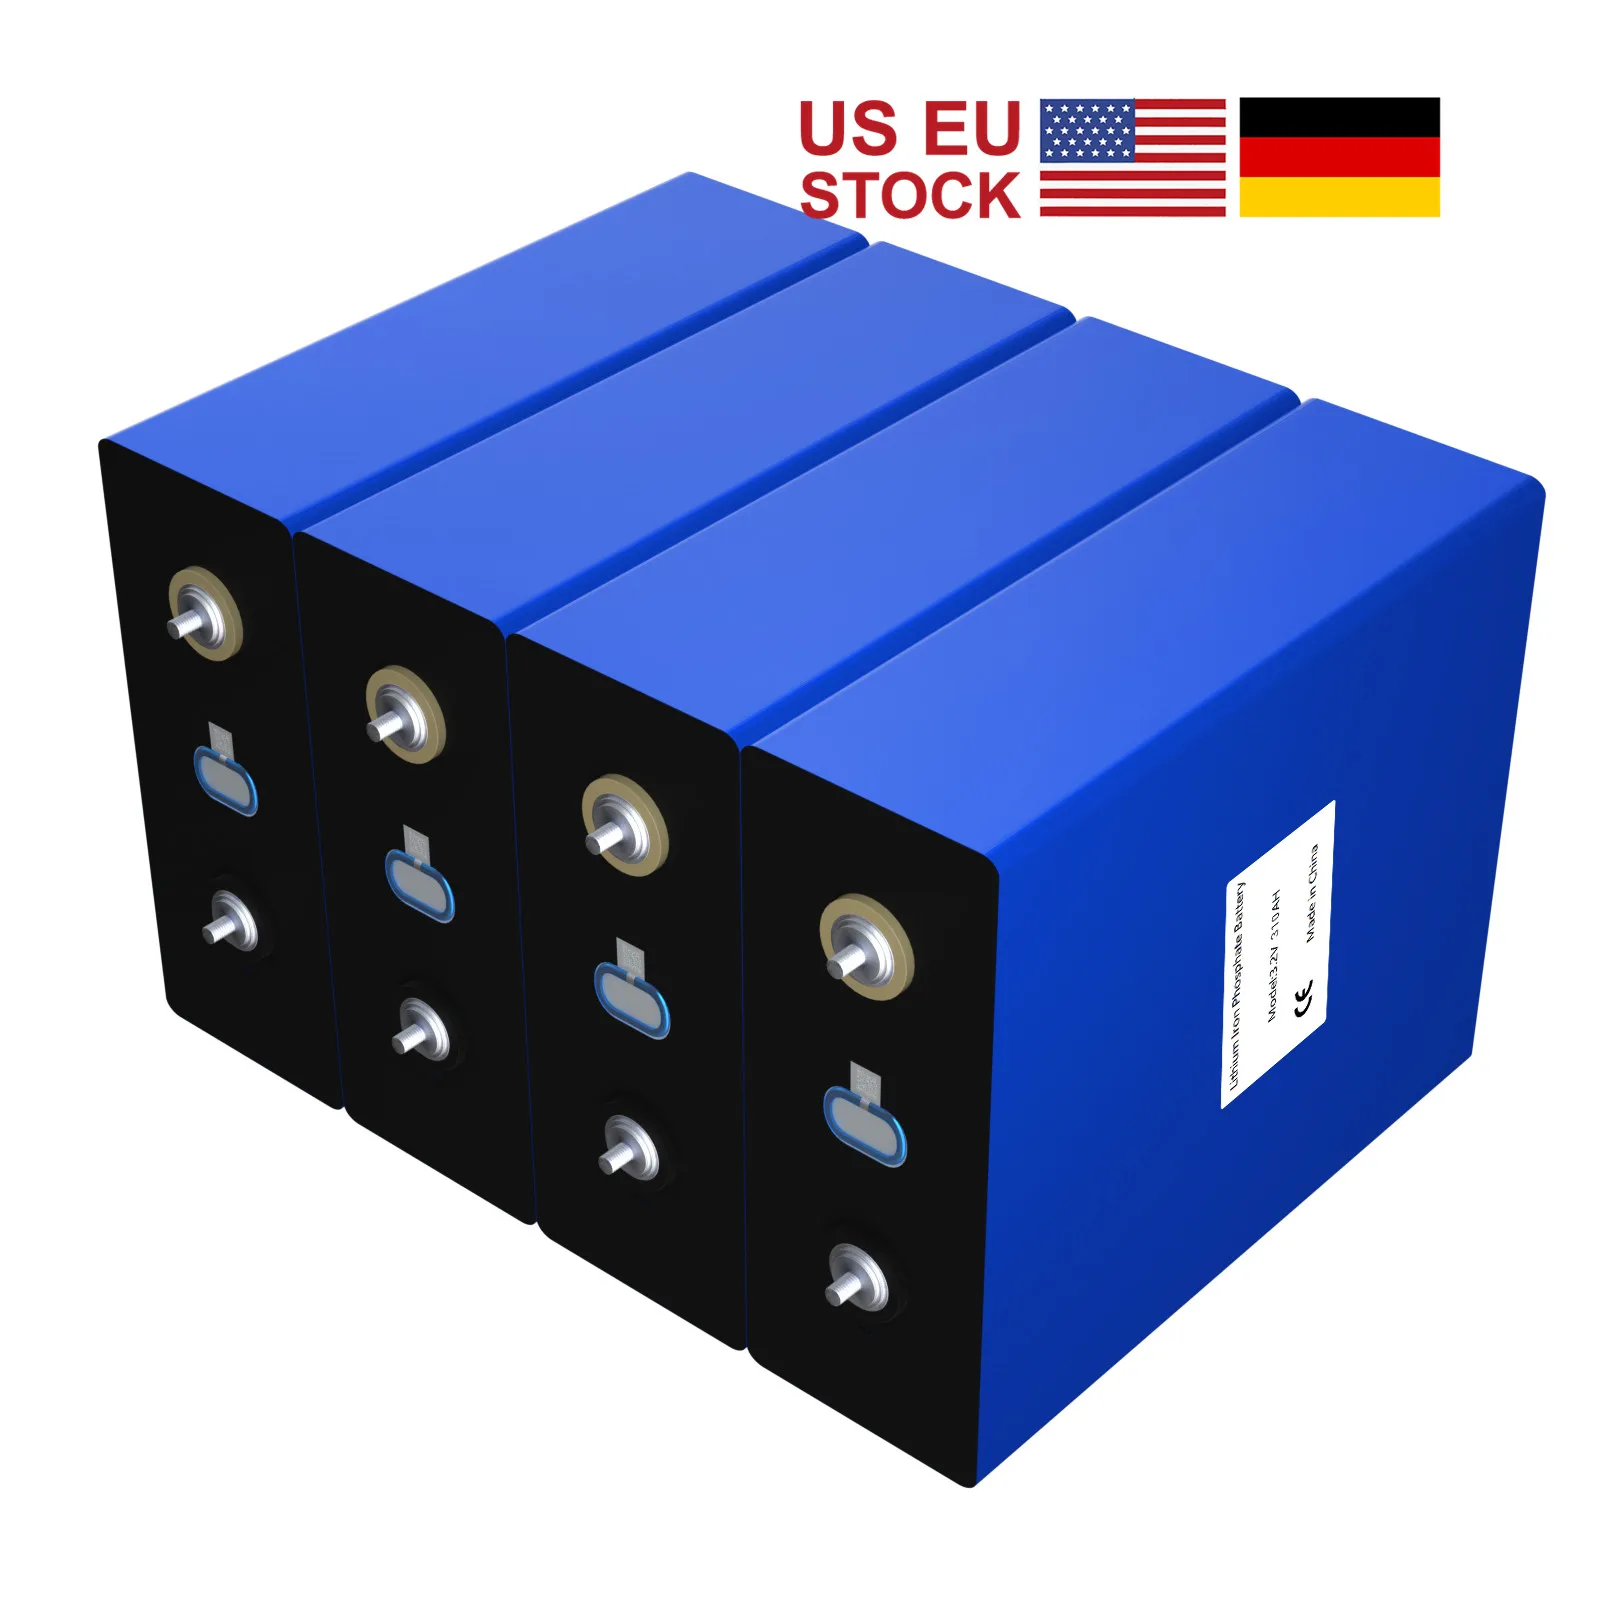 

4PCS 3.2V 310AH 320AH LiFePO4 Battery Cell Not EVE 280AH EV RV Solar USA Europe Warehouse UPS DHL FEDEX 7-15 DAYS Fast Delivery